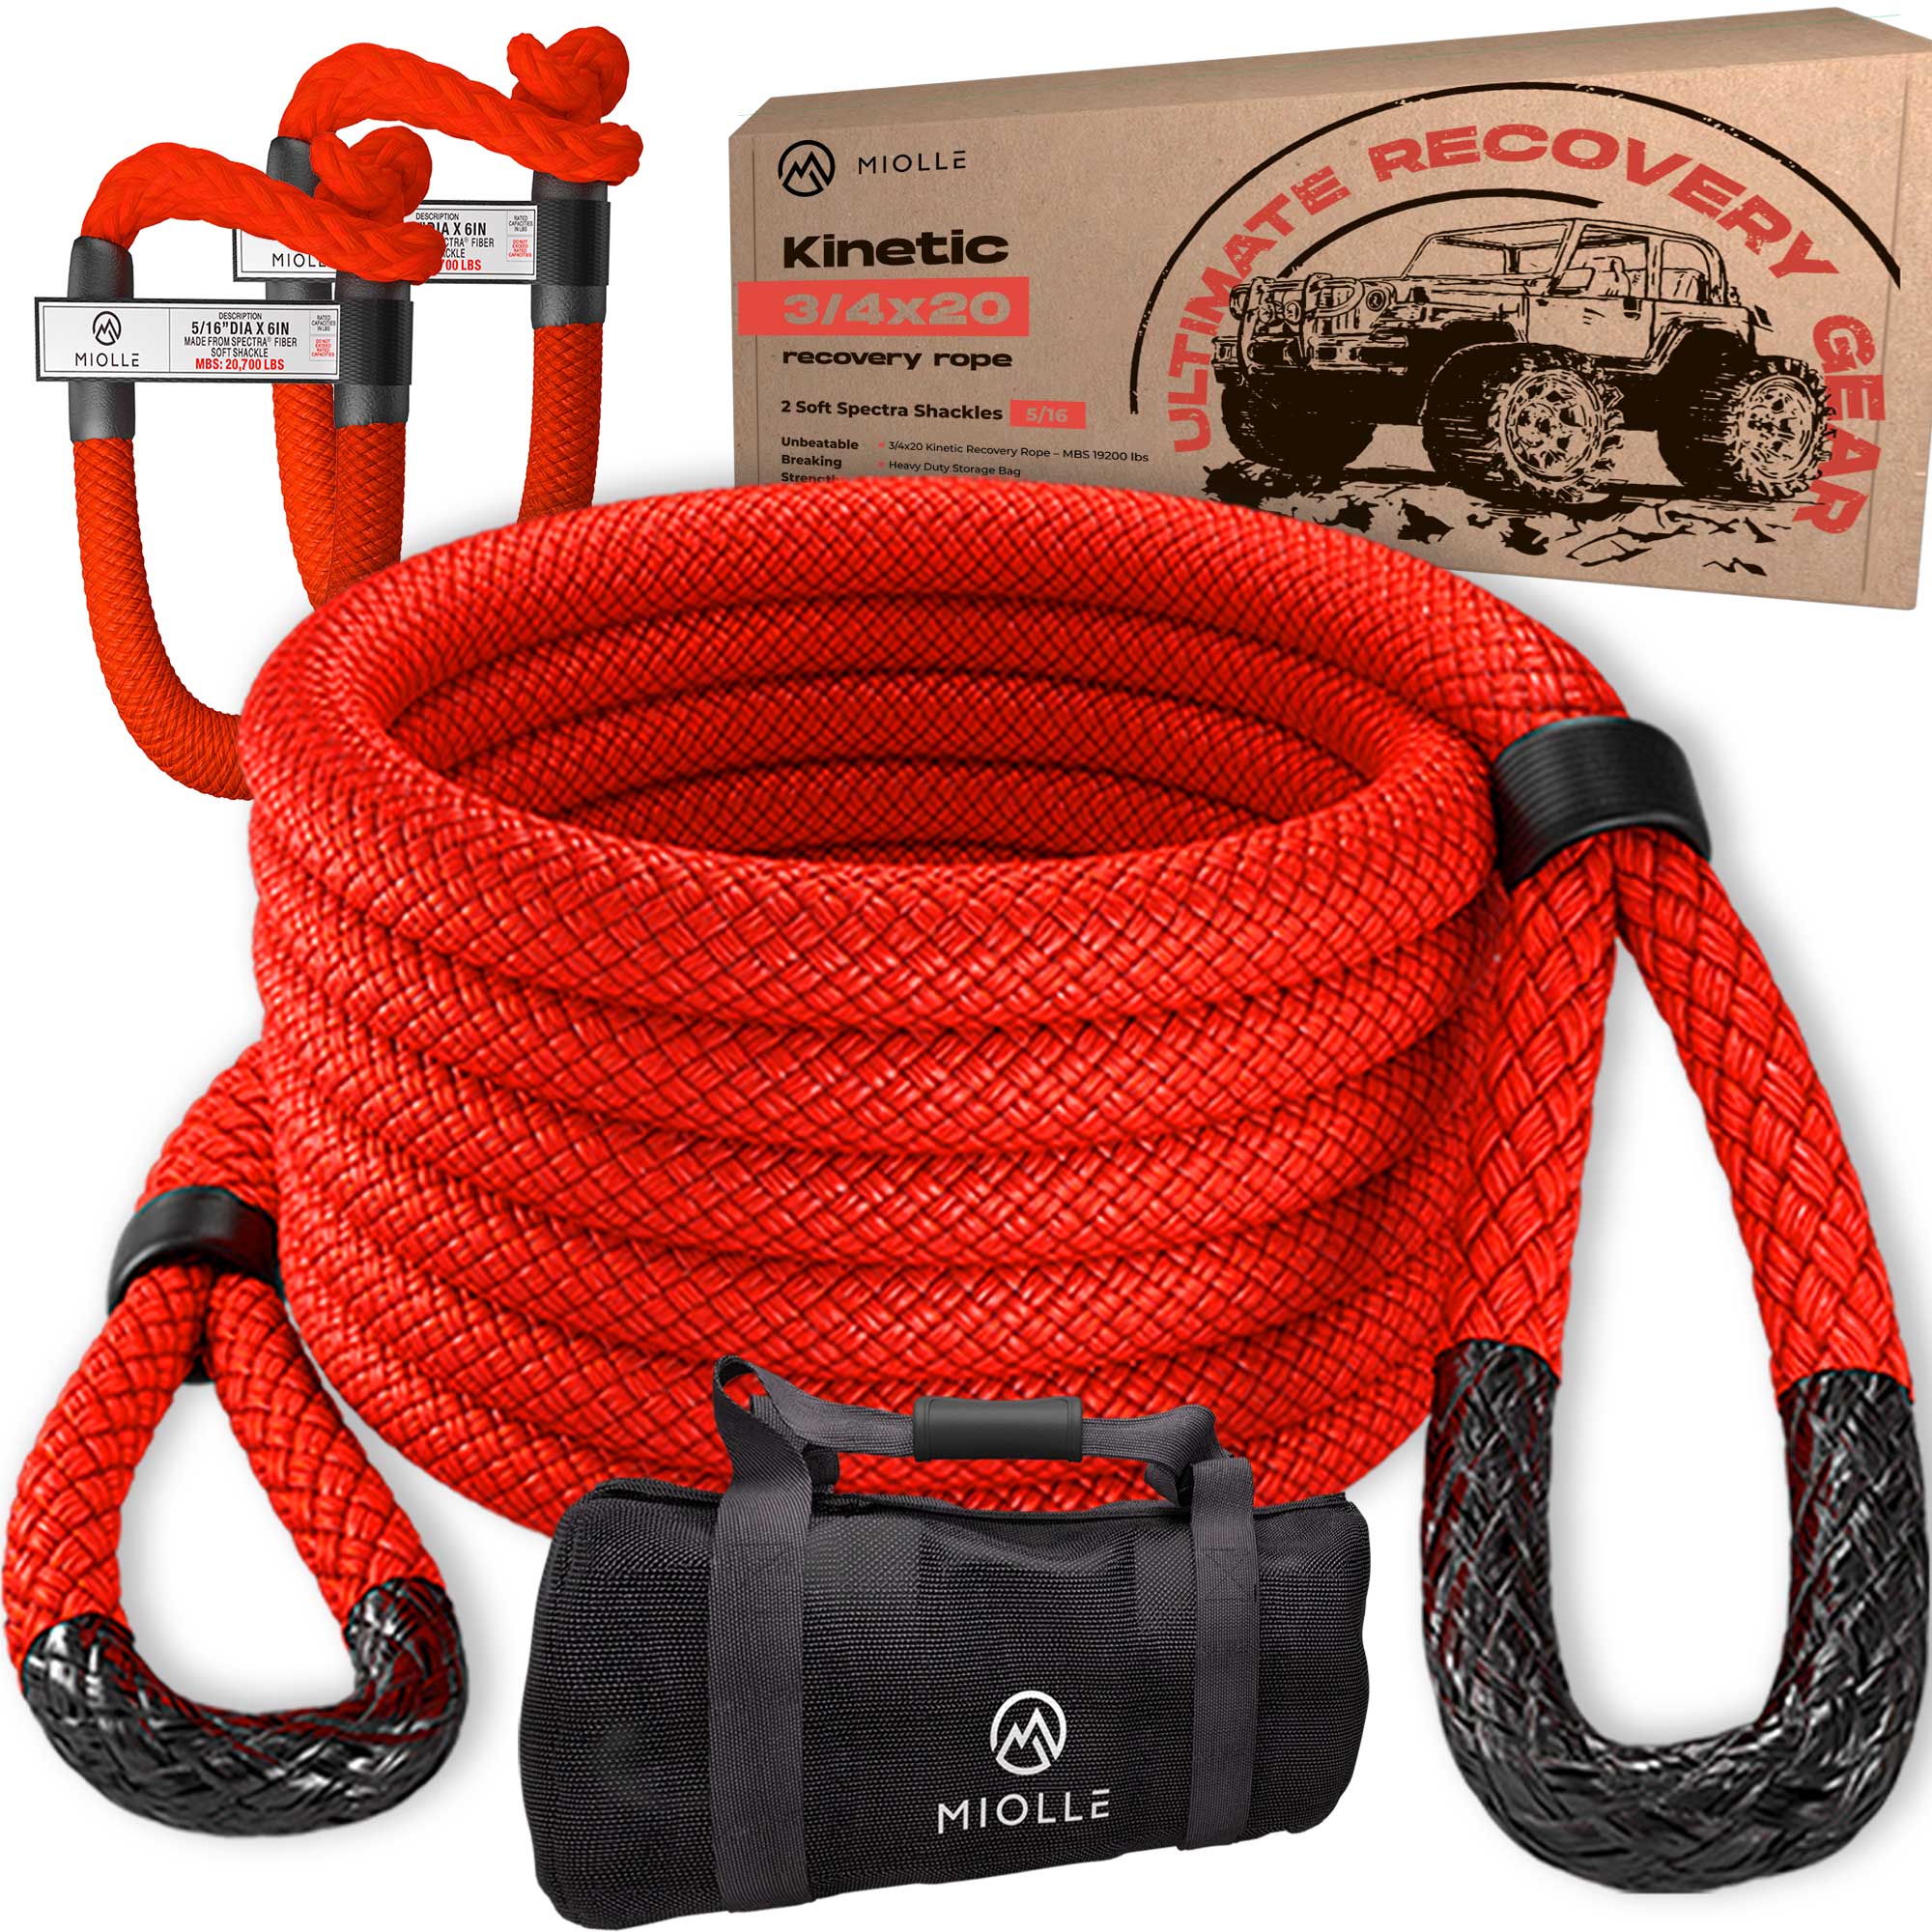 Miolle 729979 Kinetic Recovery Tow Rope 3/4 x 20' (19200lbs) with 2 Soft Shackle 5/16' x 6' (20700 lbs) Great for Car, Truck, Suv, Jeep, ATV, UTV, or Snowmobile